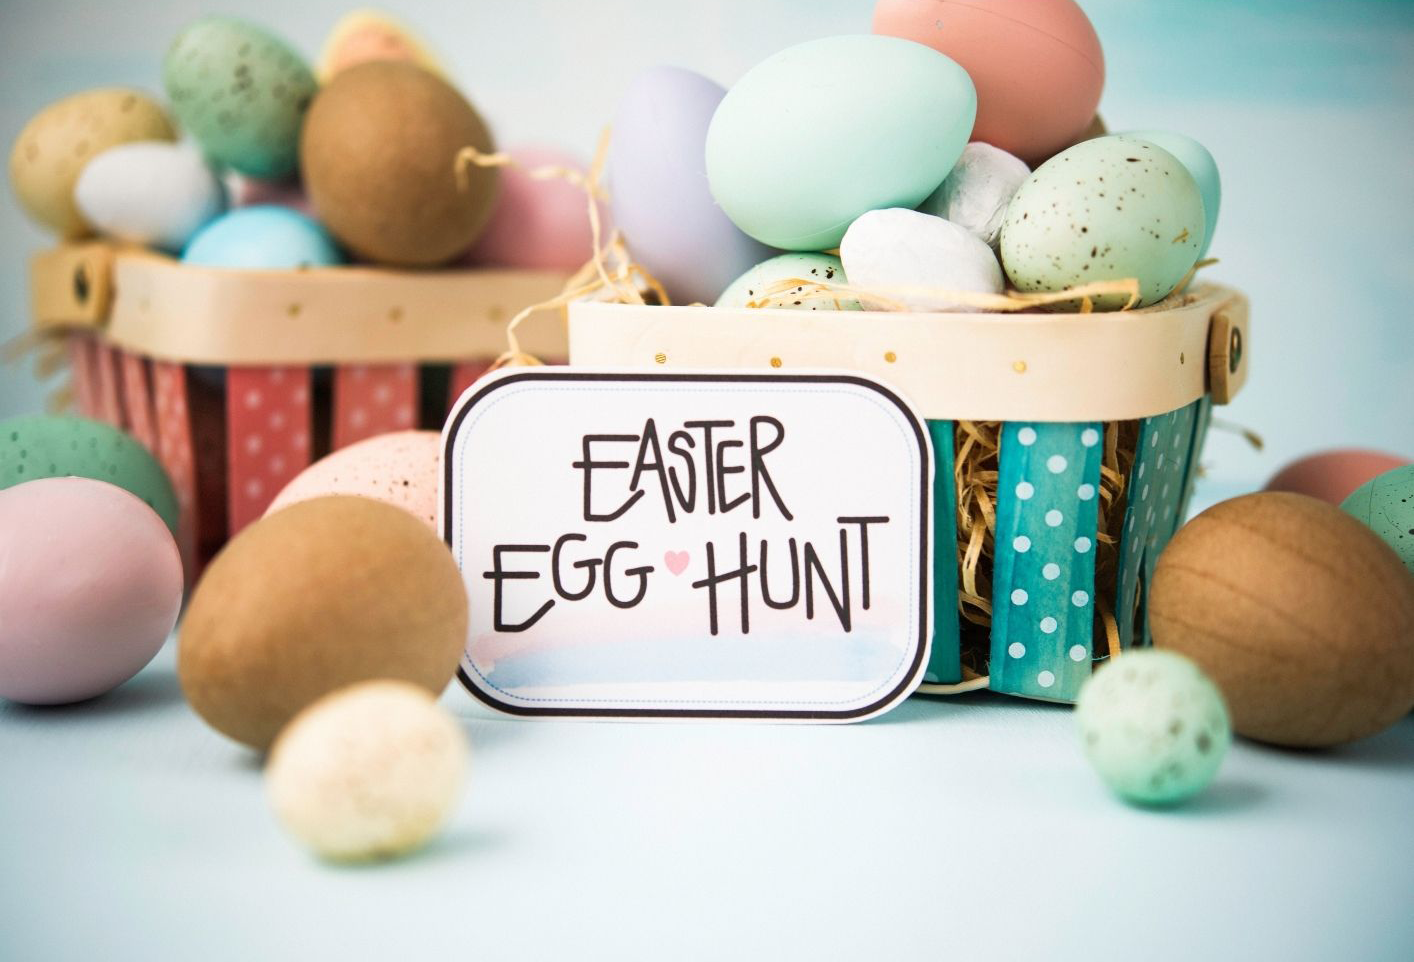 How to plan an amazing Easter egg hunt